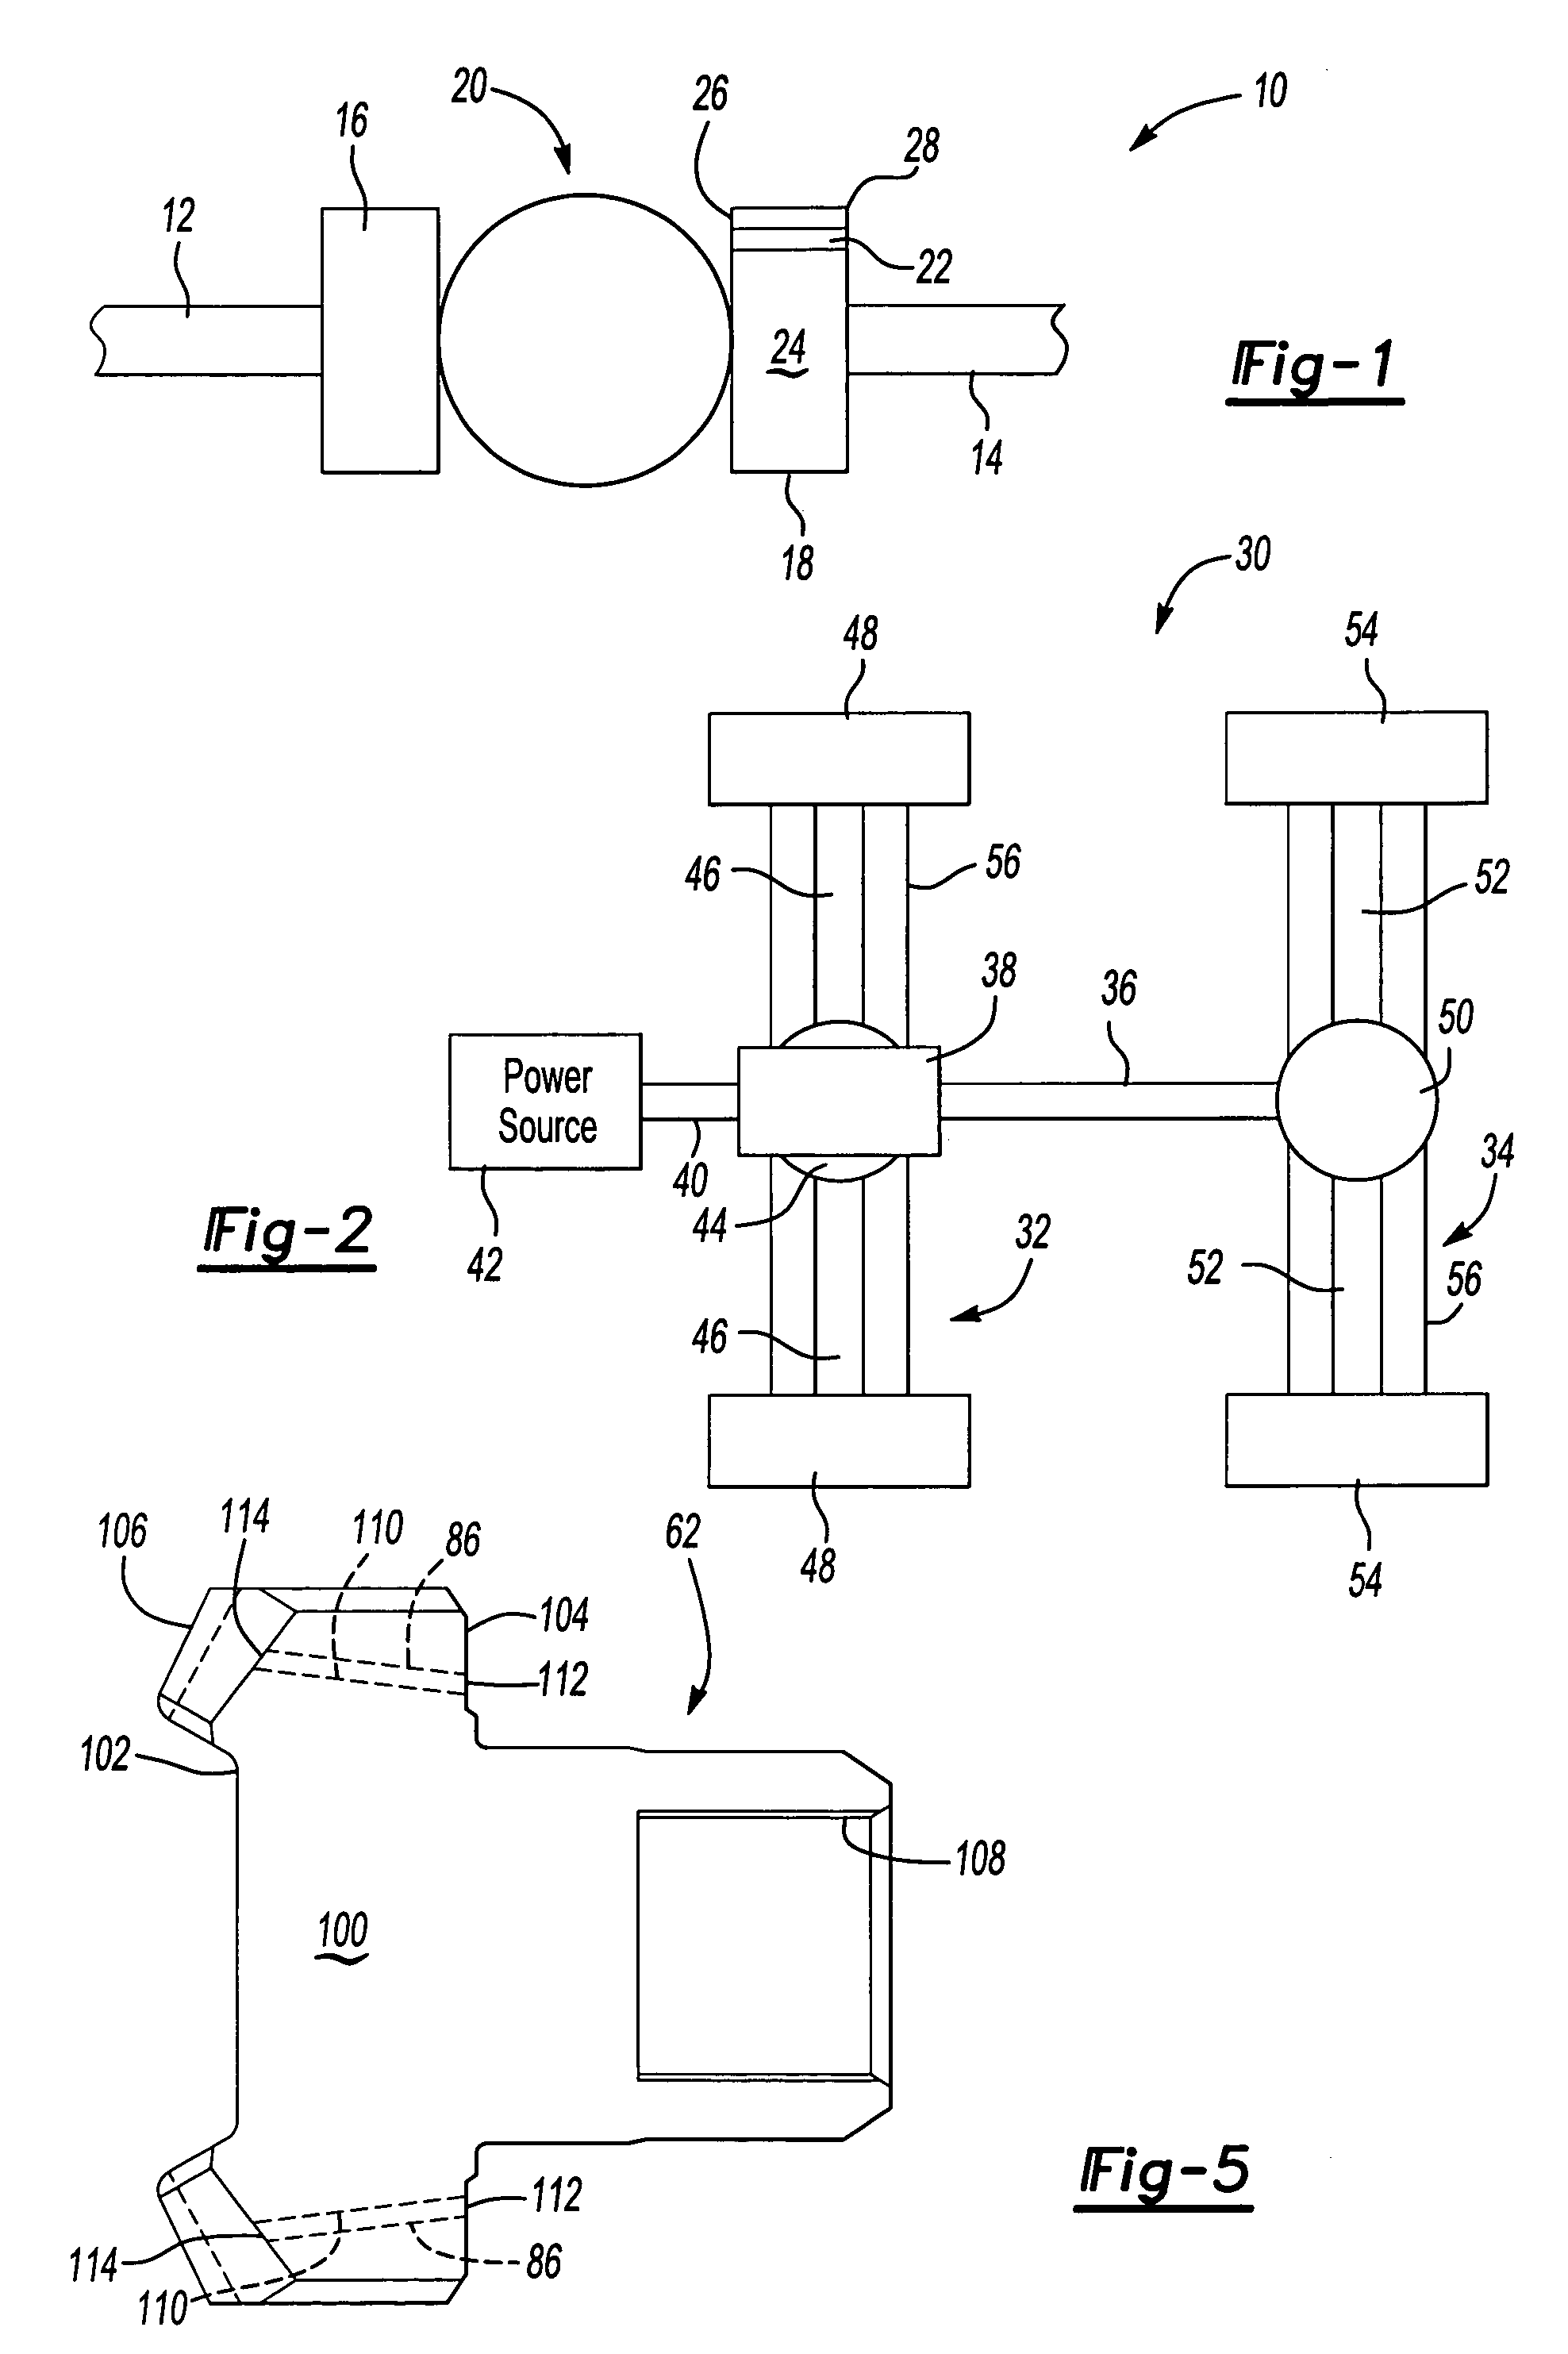 Method and apparatus for lubricating a differential gear assembly